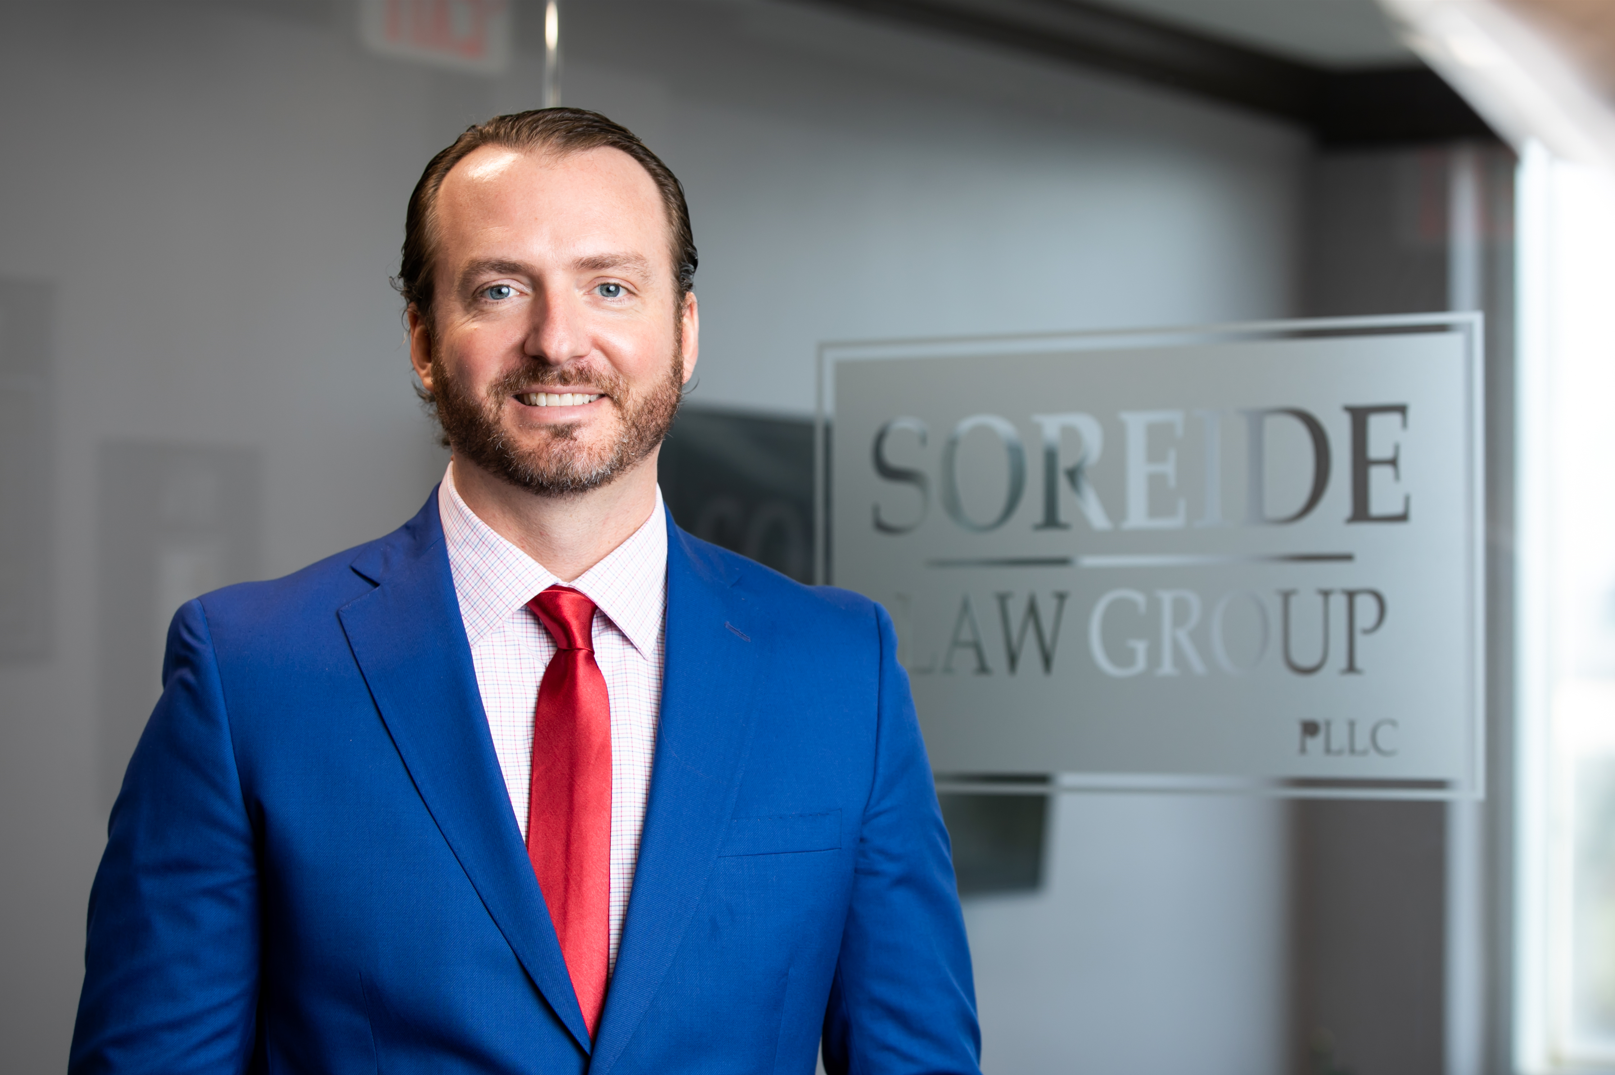 Sue Your Broker In Ft. Lauderdale With Leading FINRA Arbitration Law Firm